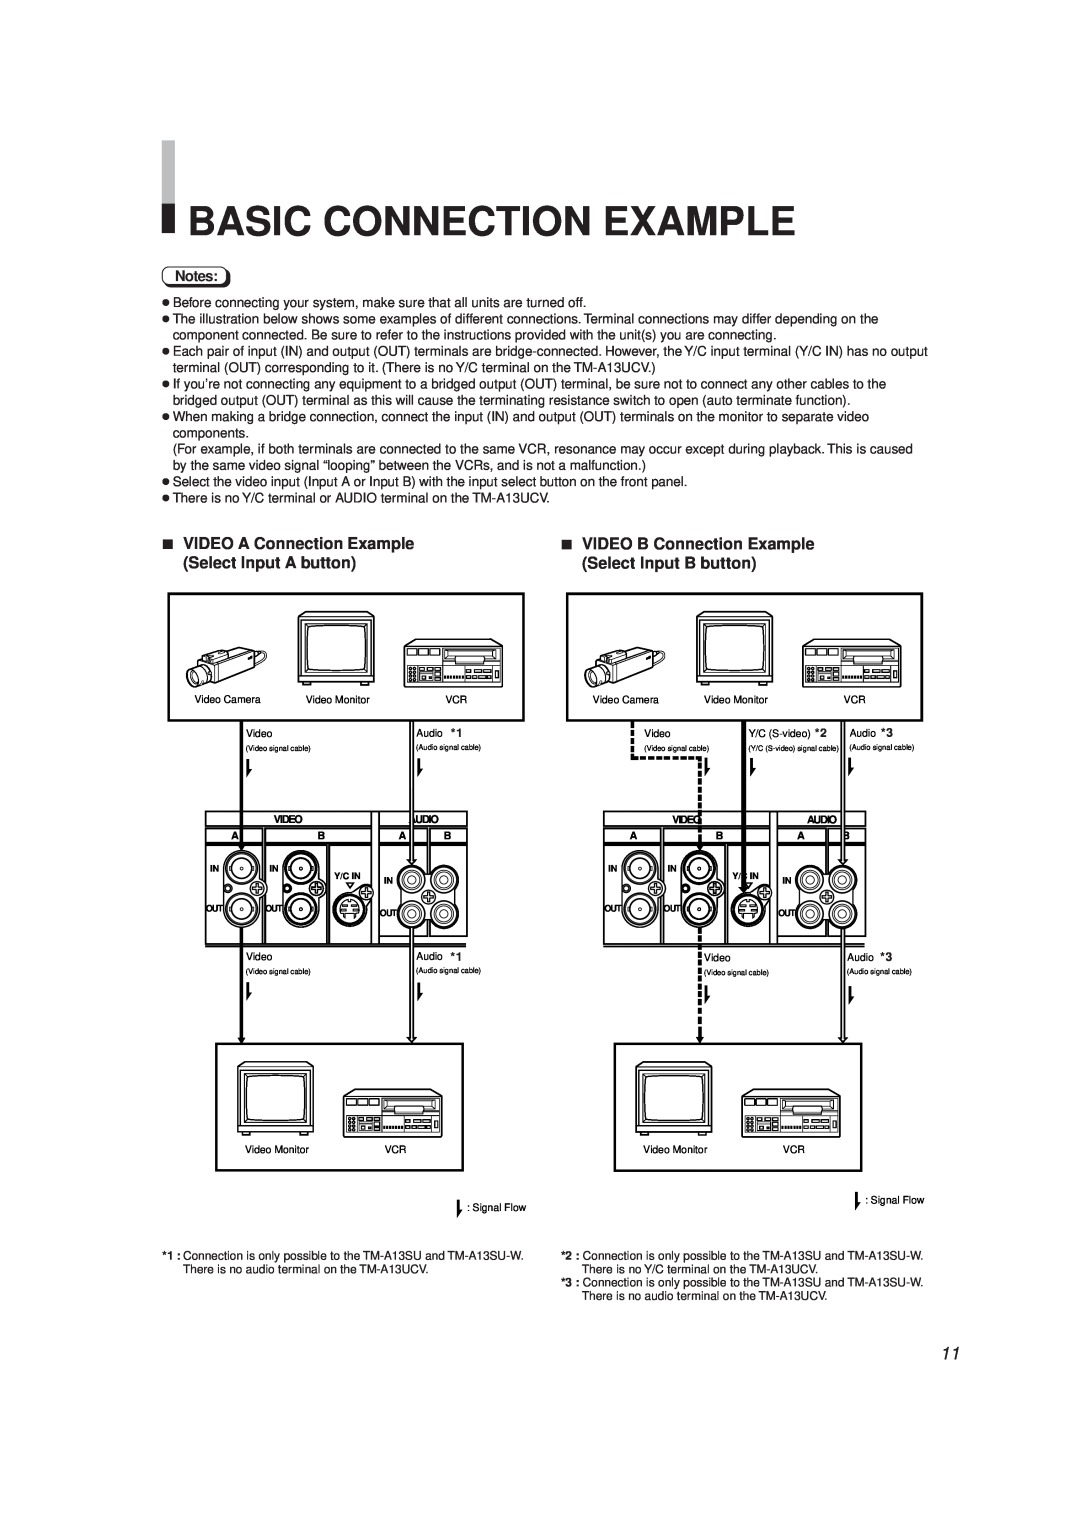 JVC TM-A13SU-W, TM-A13UCV manual Basic Connection Example, VIDEO A Connection Example Select Input A button 